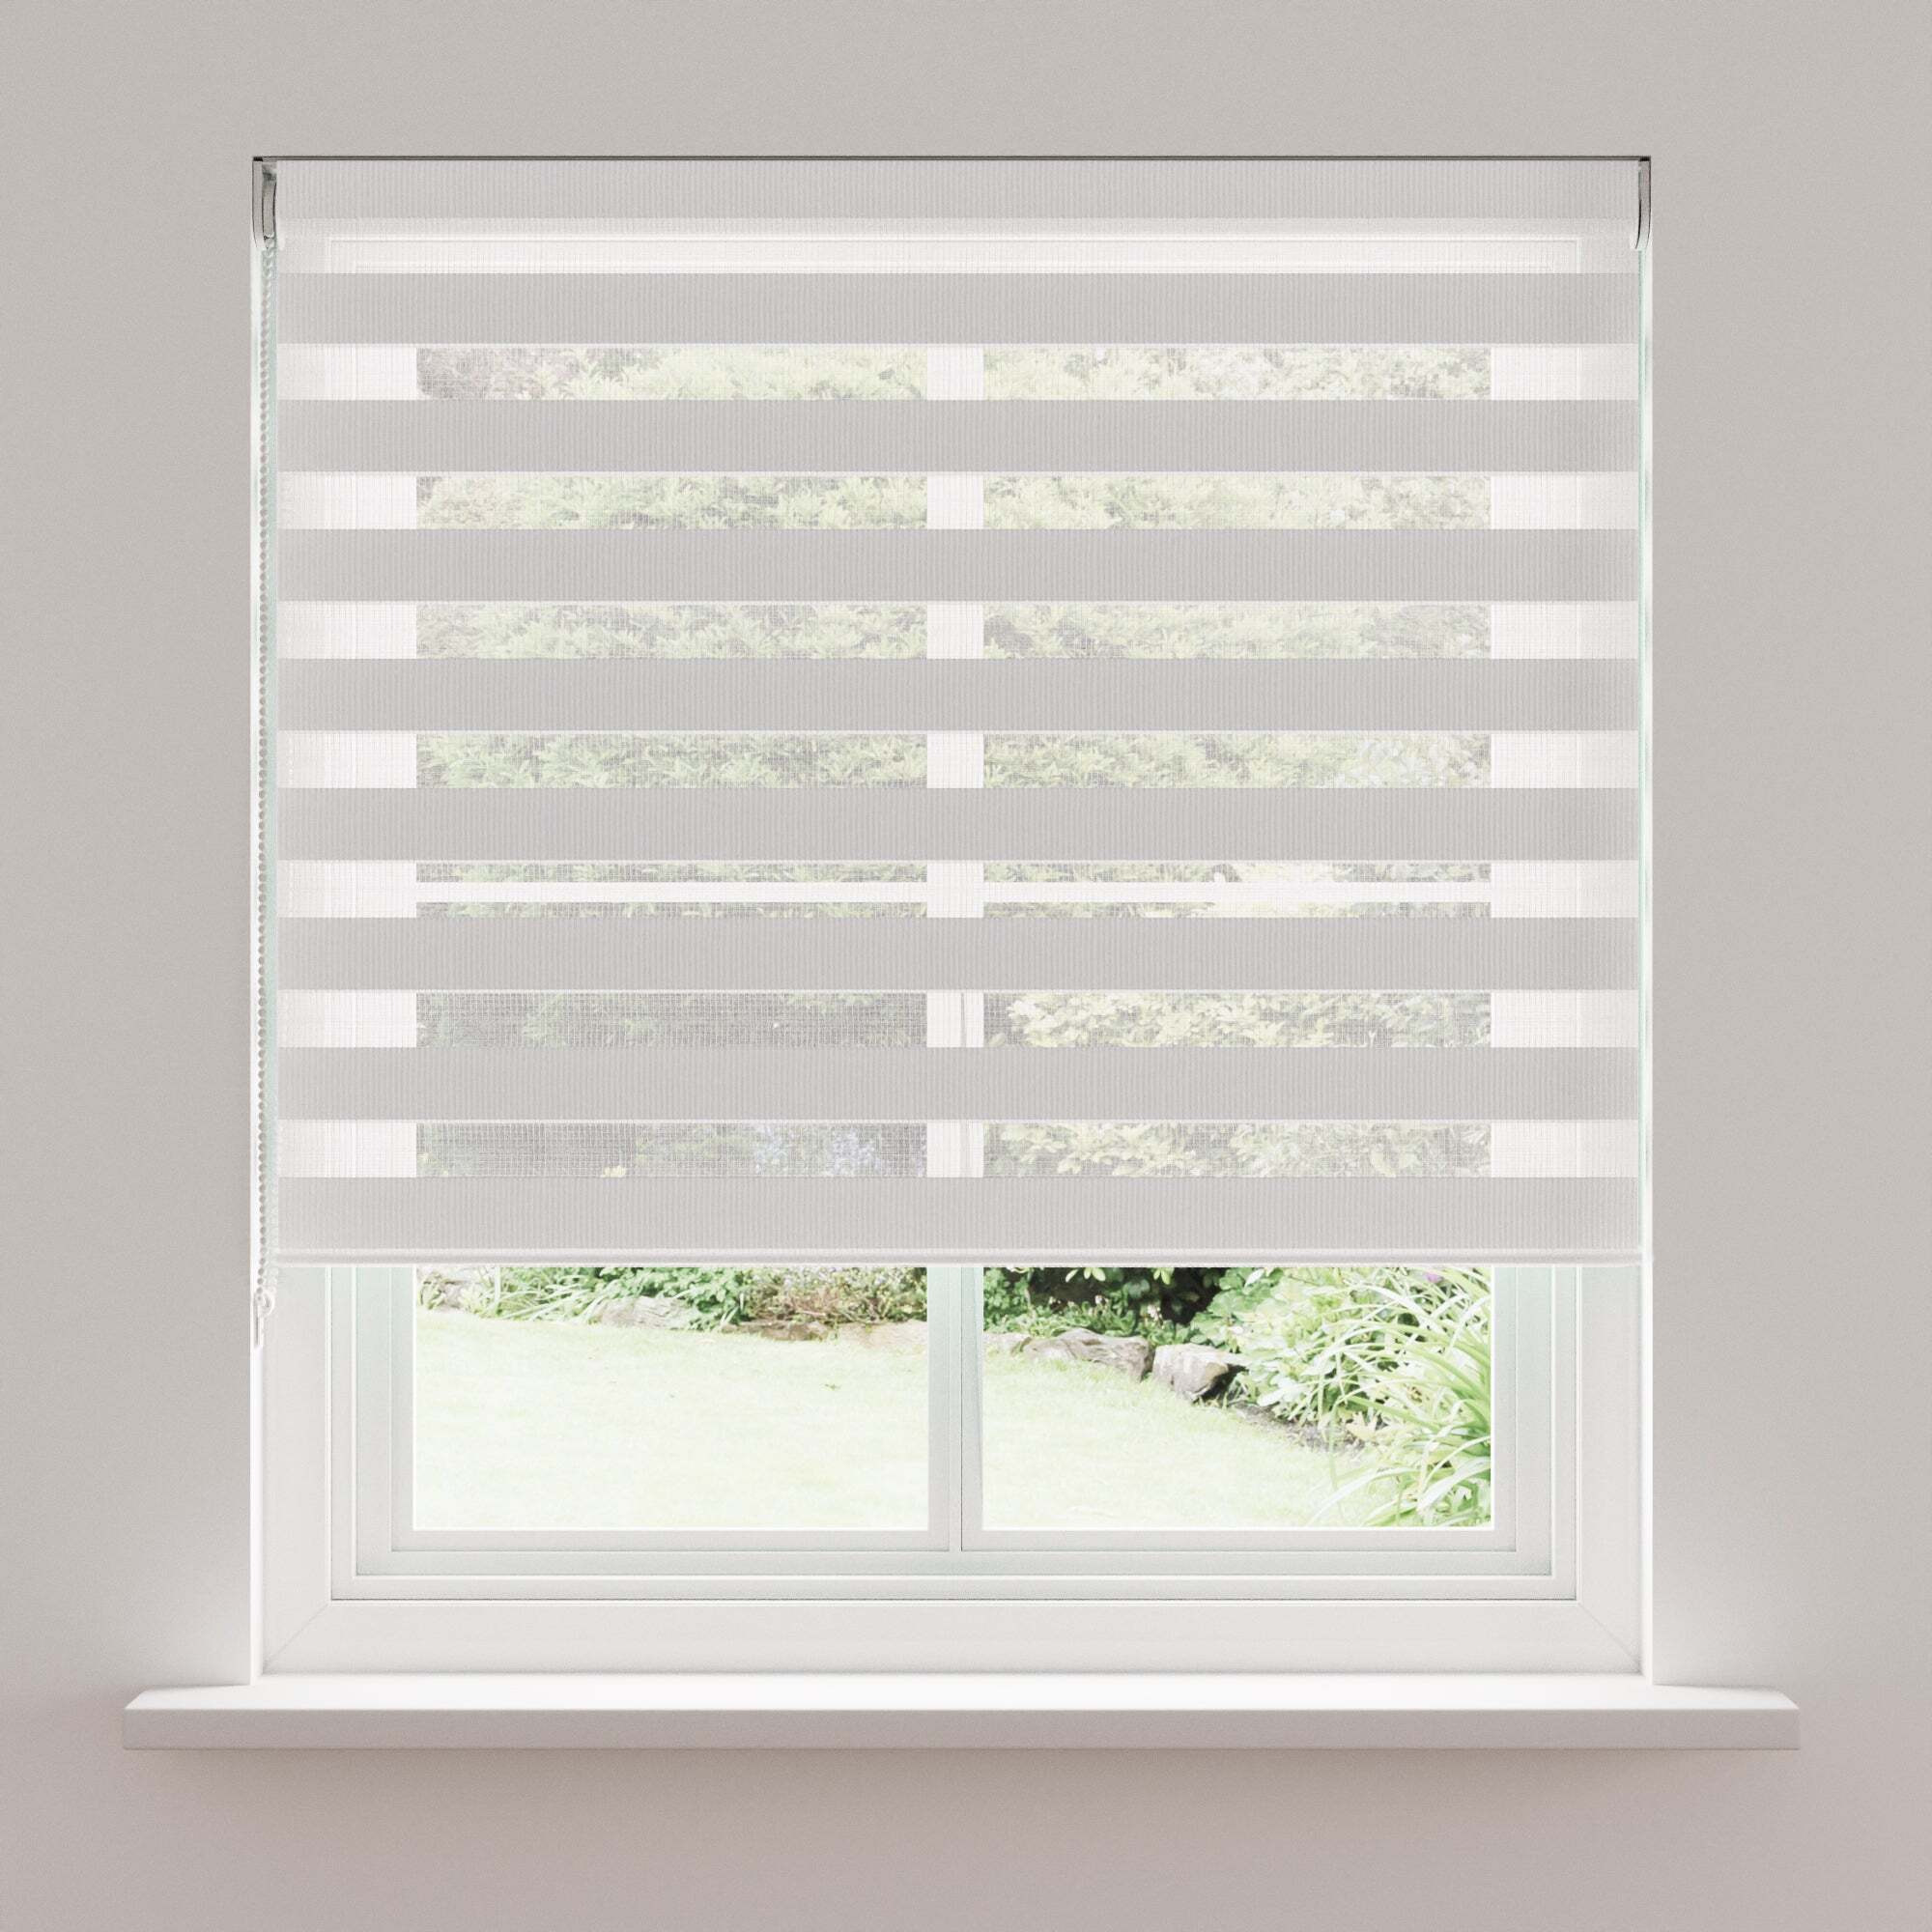 Day and Night White Daylight Roller Blind White